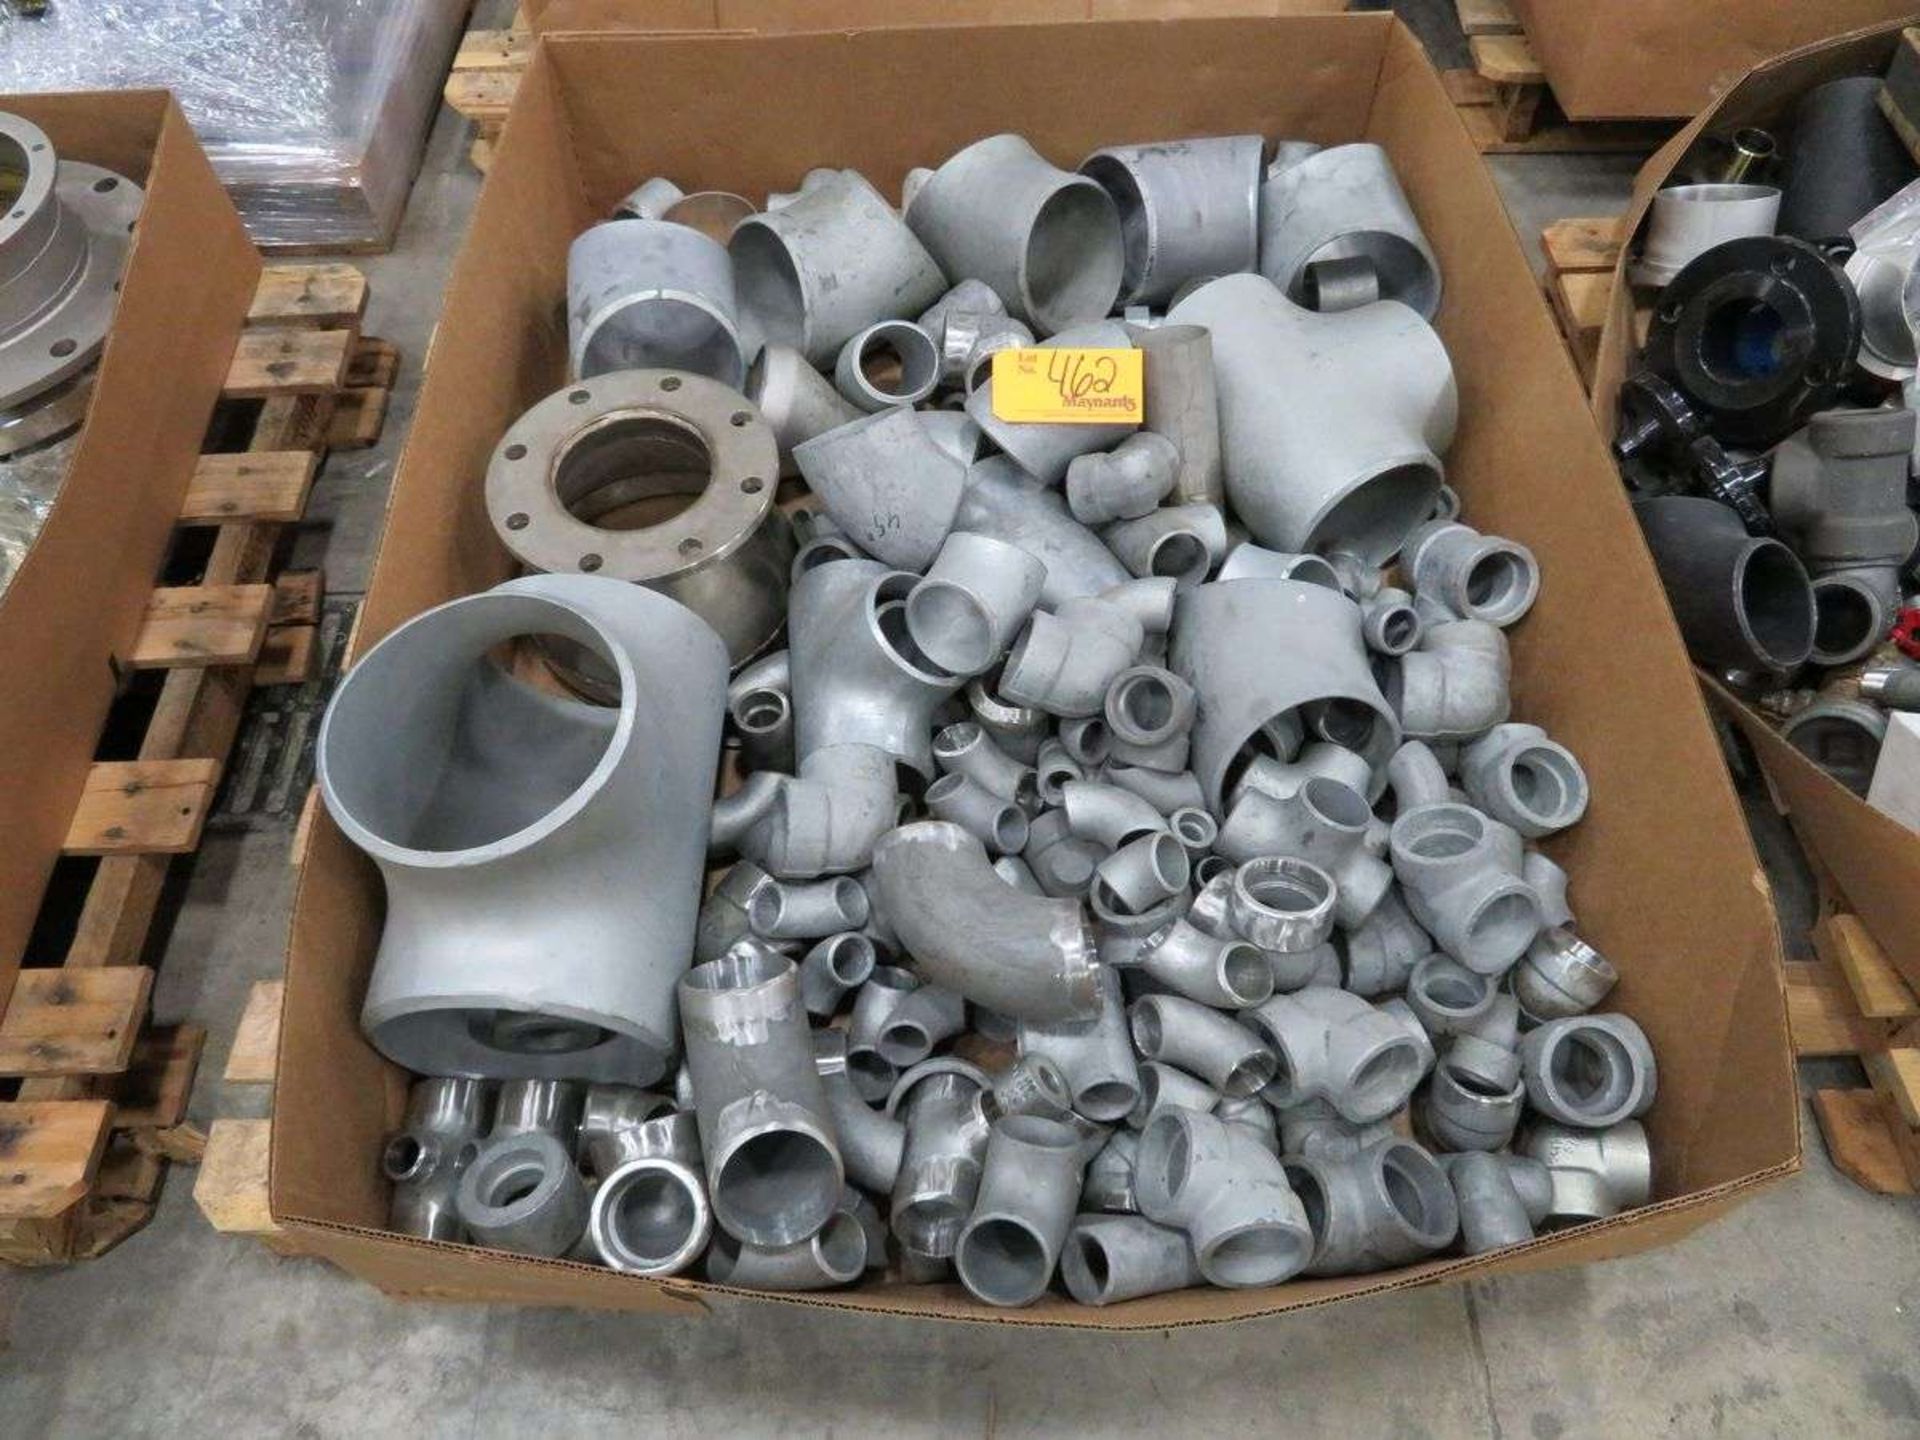 (10) Pallets of Assorted Pipe Fittings, Couplings, Support Clamps, High Pressure Fittings, Etc. - Bild 6 aus 11